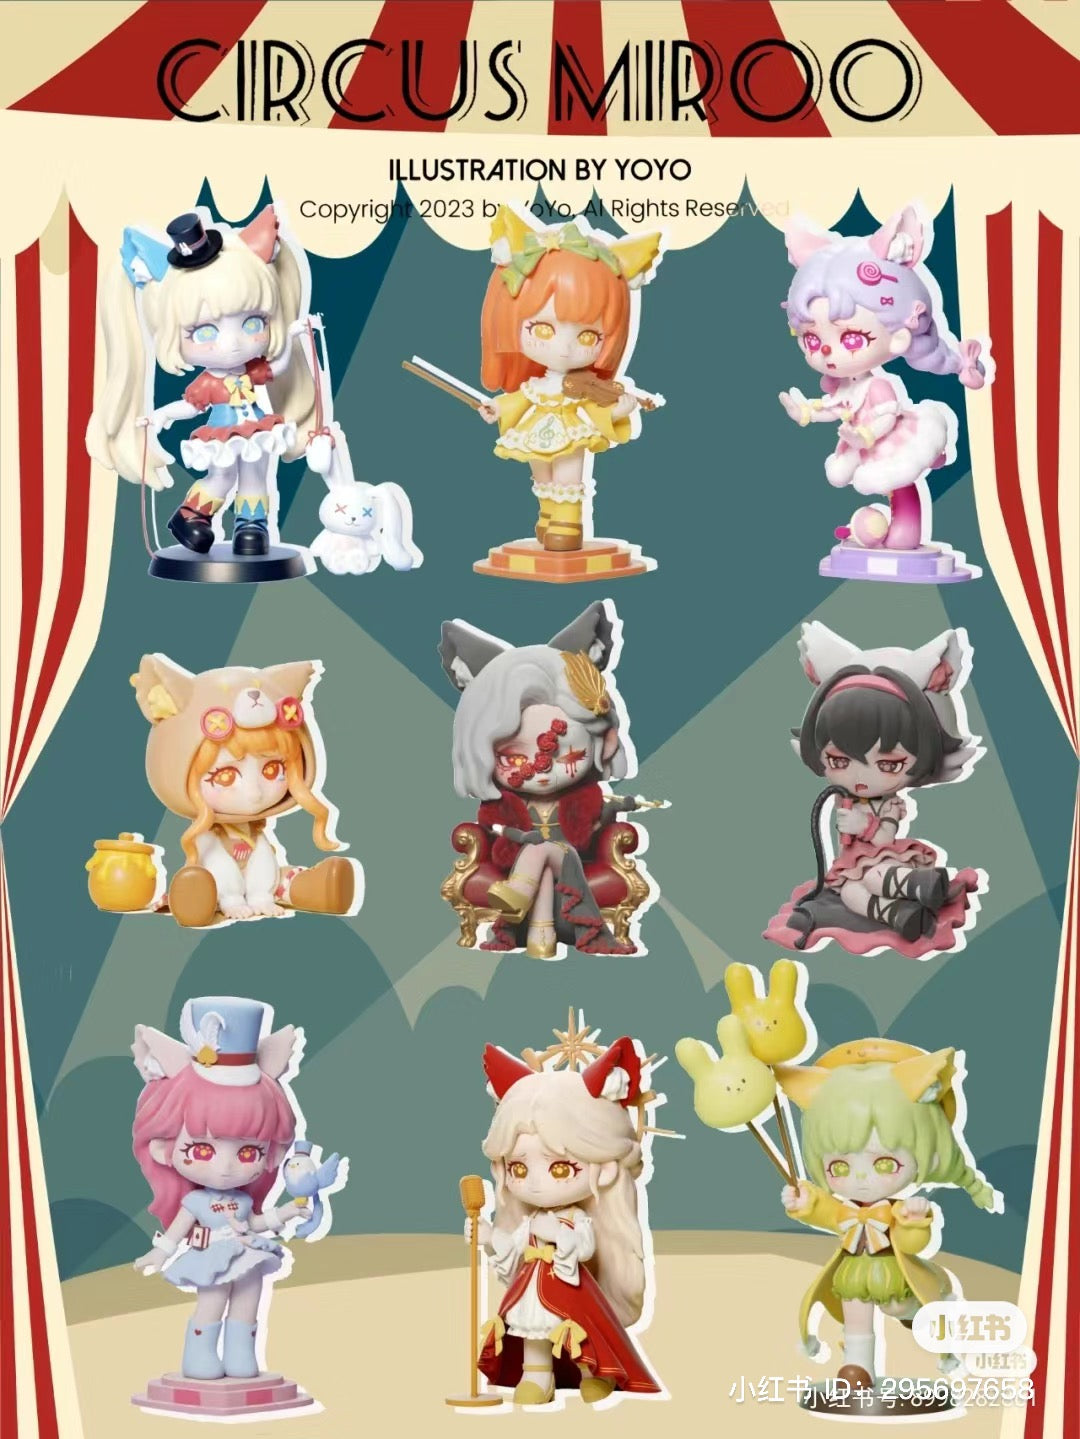 A blind box series featuring MIROO Circus Carnival characters: cartoon figures sitting, holding a bird, violin, and whip. Preorder for May 2024. Available at Strangecat Toys.